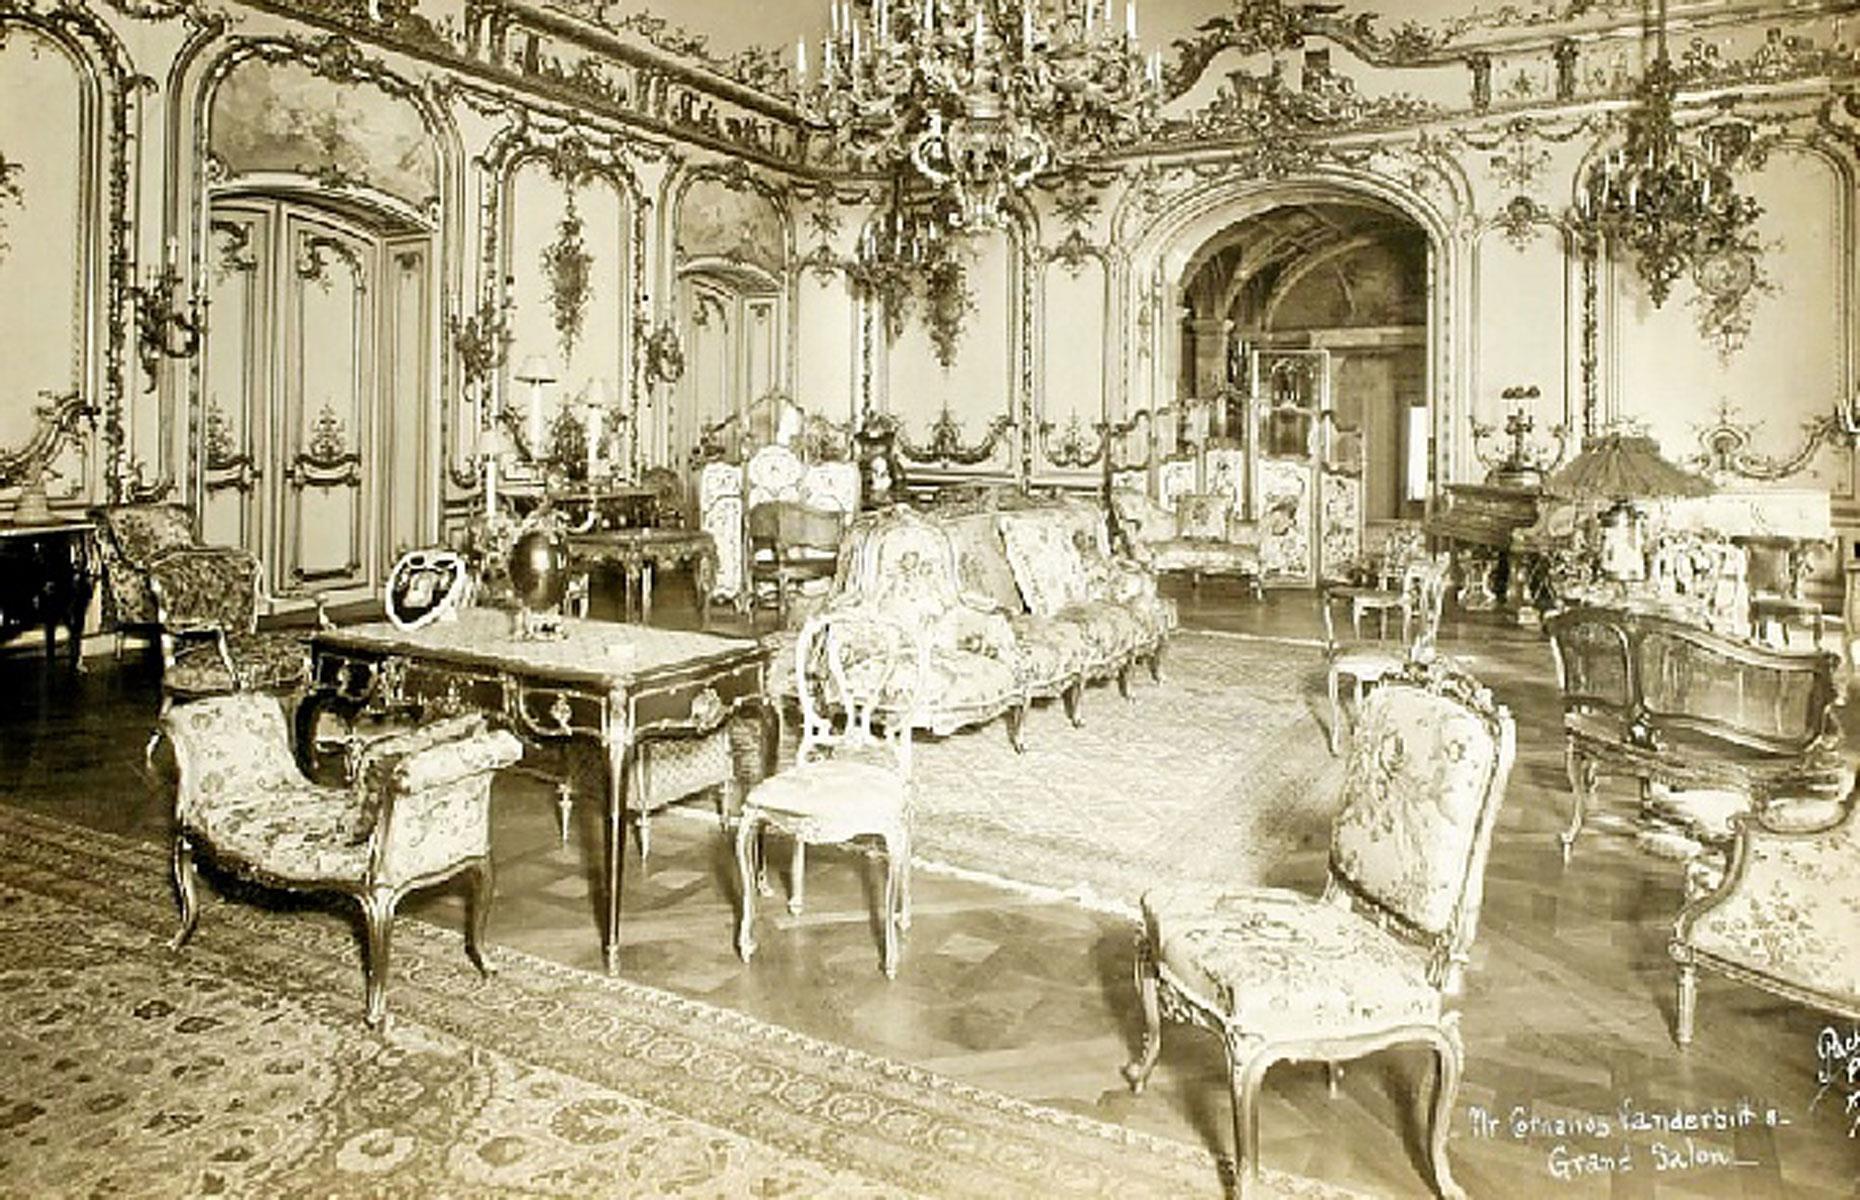 <p>Cornelius hired the celebrated Beaux-Arts architect George B Post to design the townhouse, which was commissioned as a showstopping, chateaux-inspired residence of red brick and limestone.</p>  <p>After the house’s completion in 1883, Cornelius went on to hire the finest artisans money could buy to decorate the interiors. Aware of the family’s precarious social position, Alice even went so far as to commission the creation of a family coat of arms, which was carved in stone above the entryway to the home.</p>